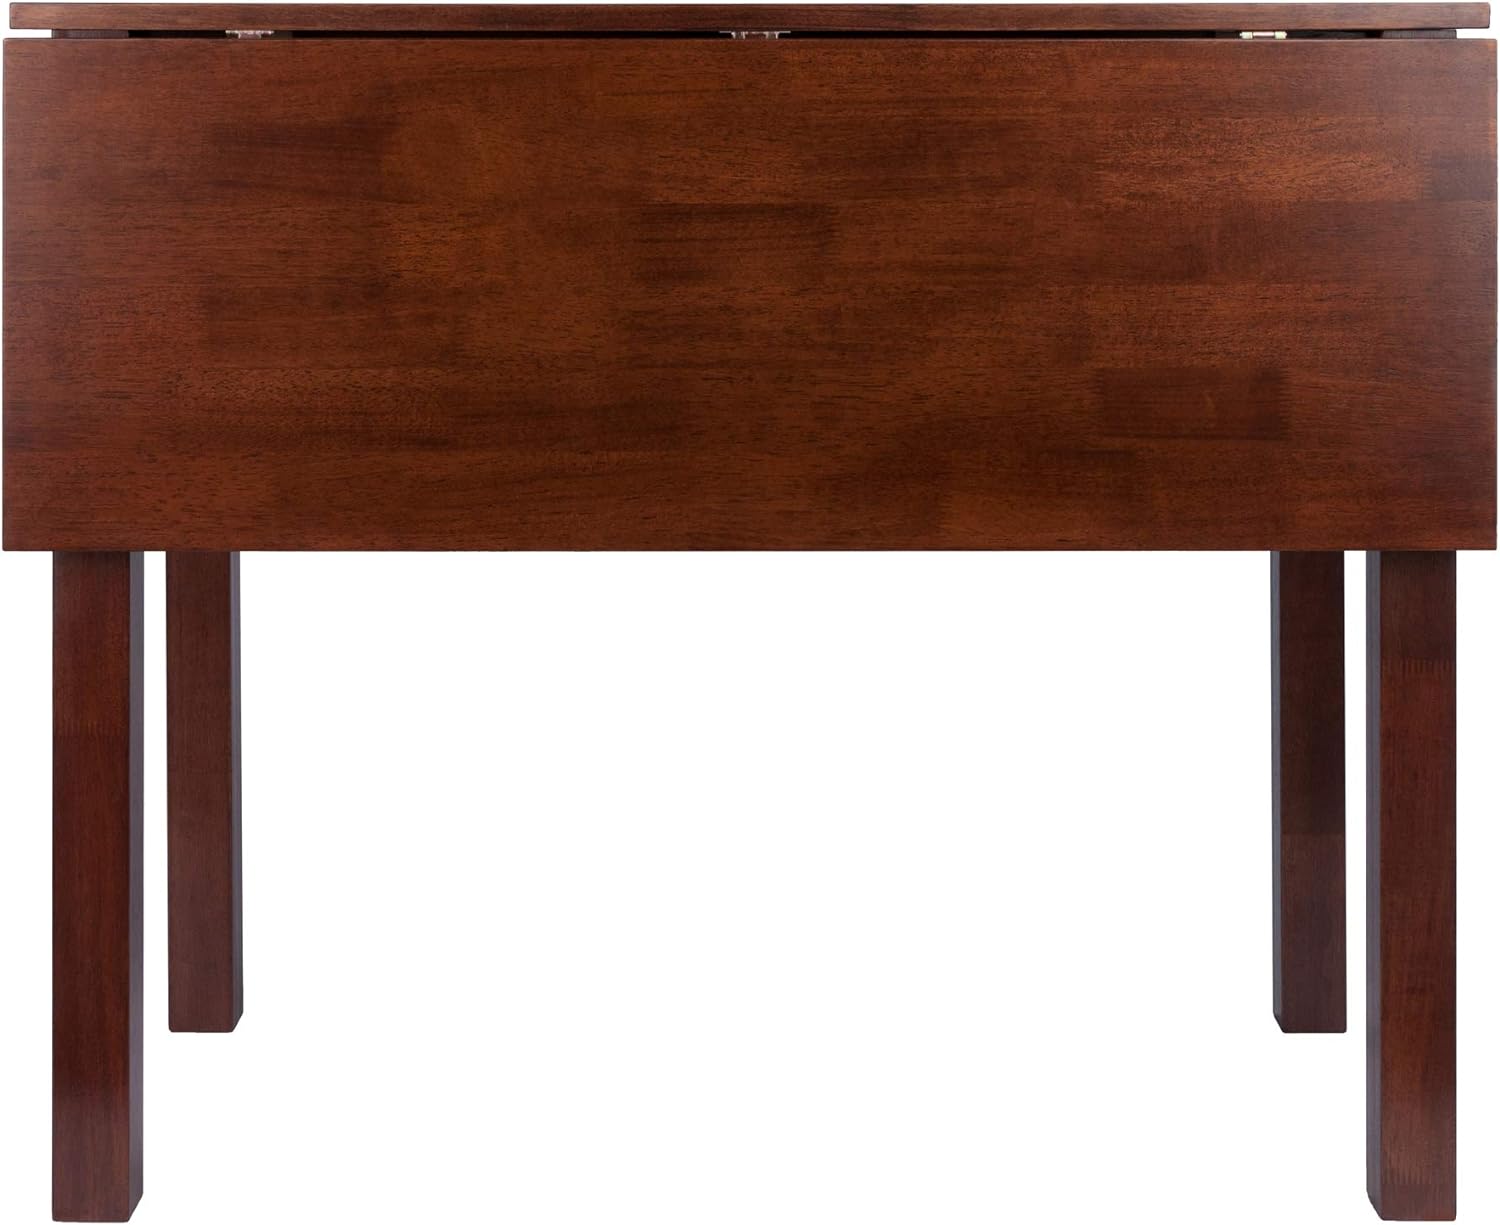 Winsome Perrone High Table, Walnut, 34.8 in x 40 in x 29.1 in